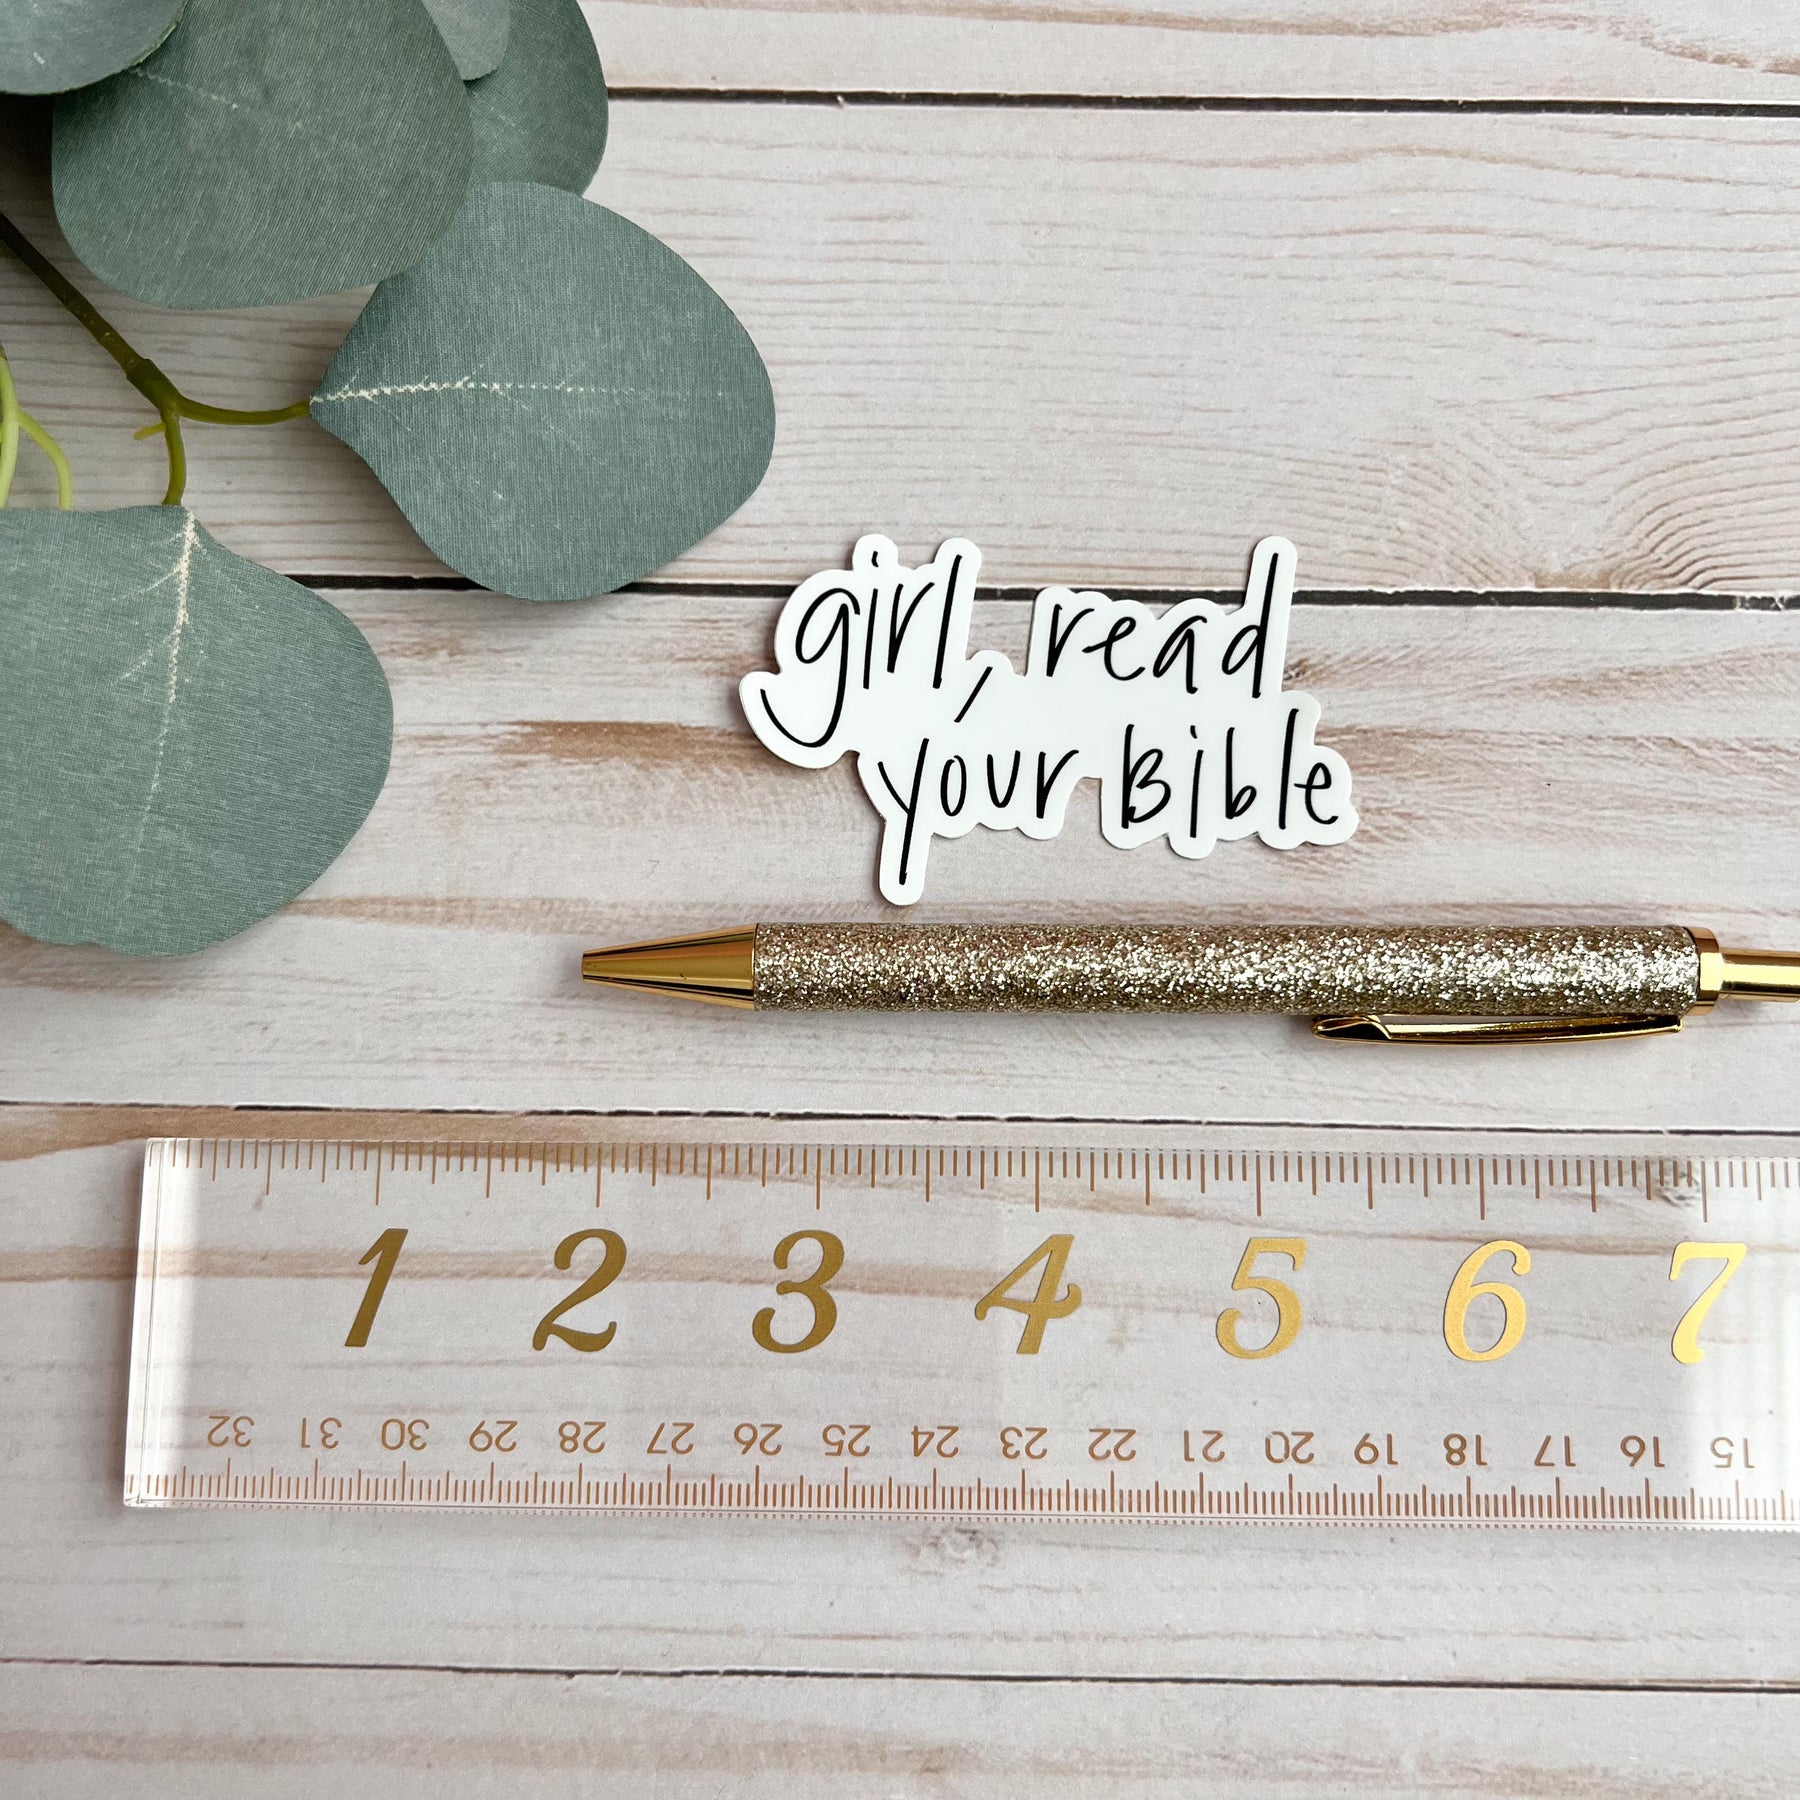 Sparkly Bible Pen – The Daily Bless